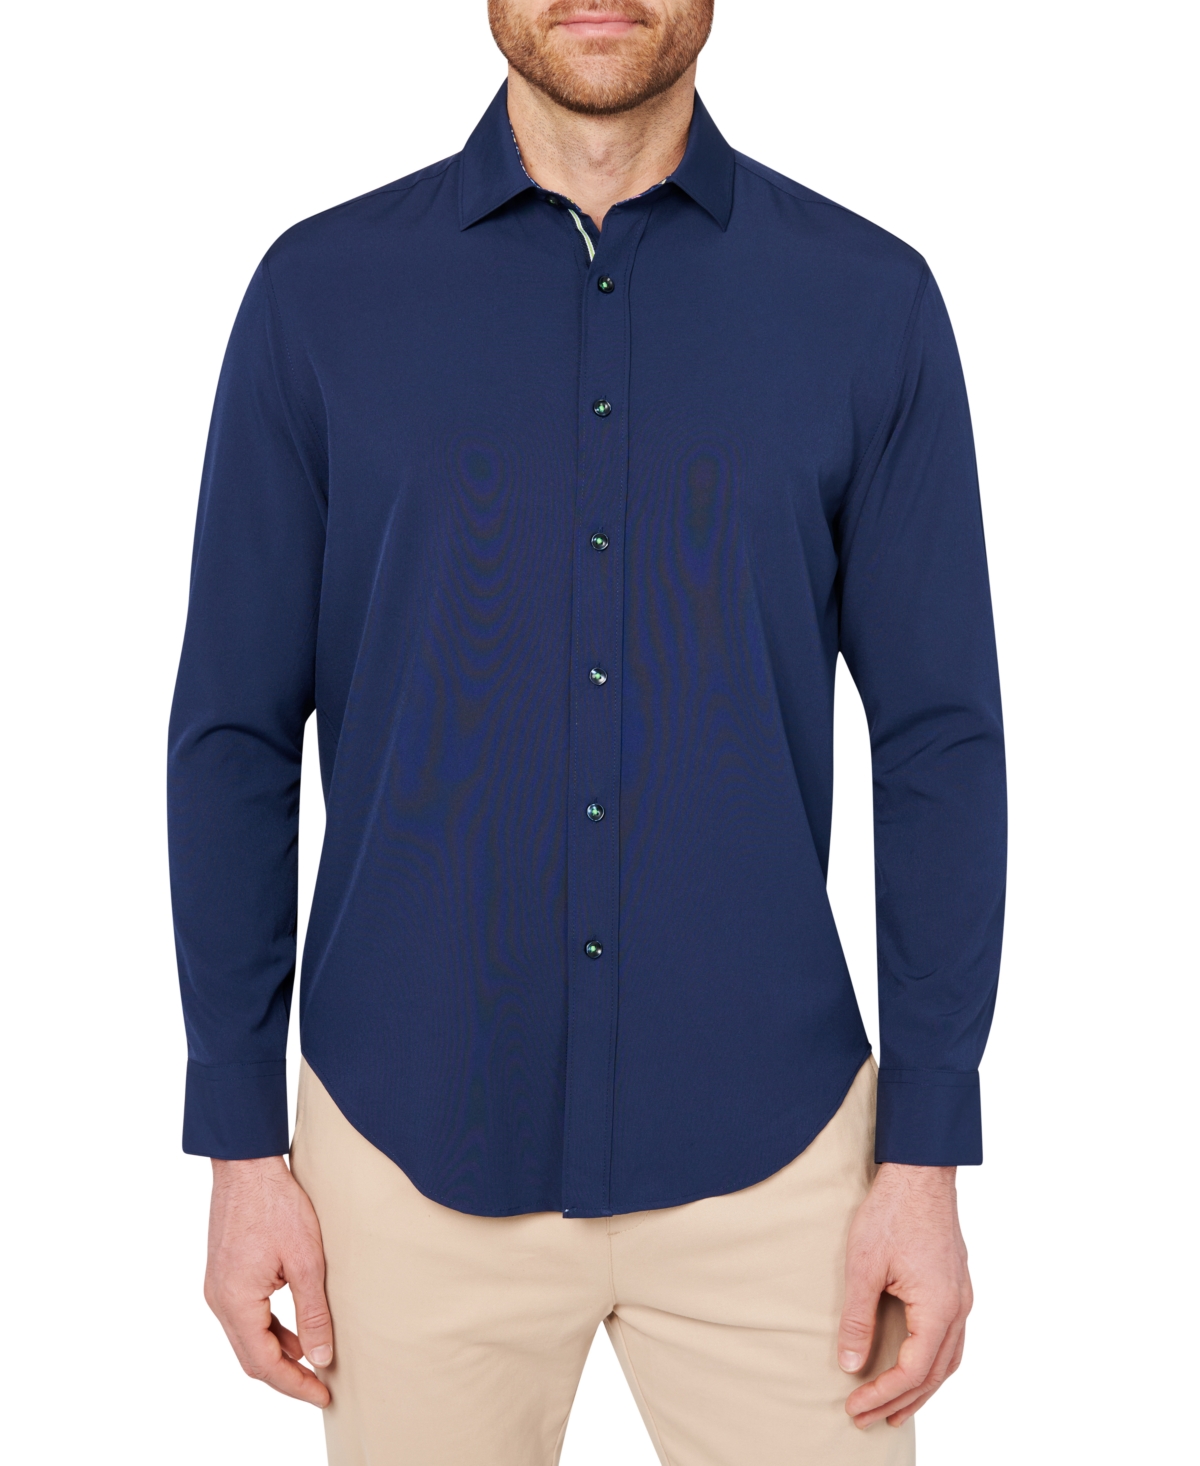 Men's Slim Fit Non-Iron Solid Performance Button-Down Shirt - Navy